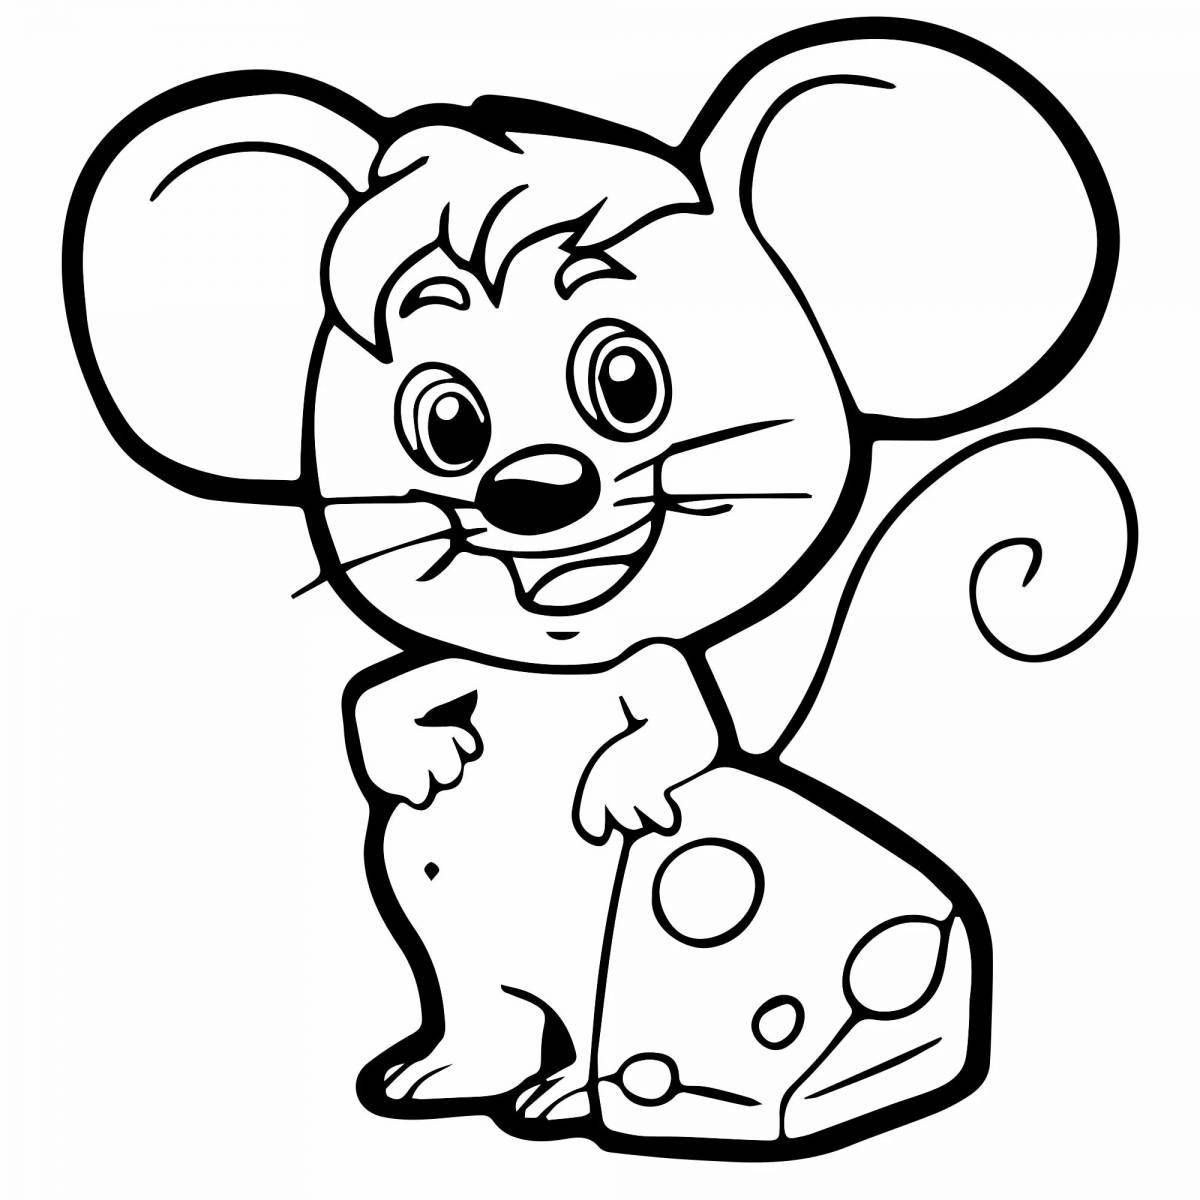 Coloring mouse for children 3-4 years old